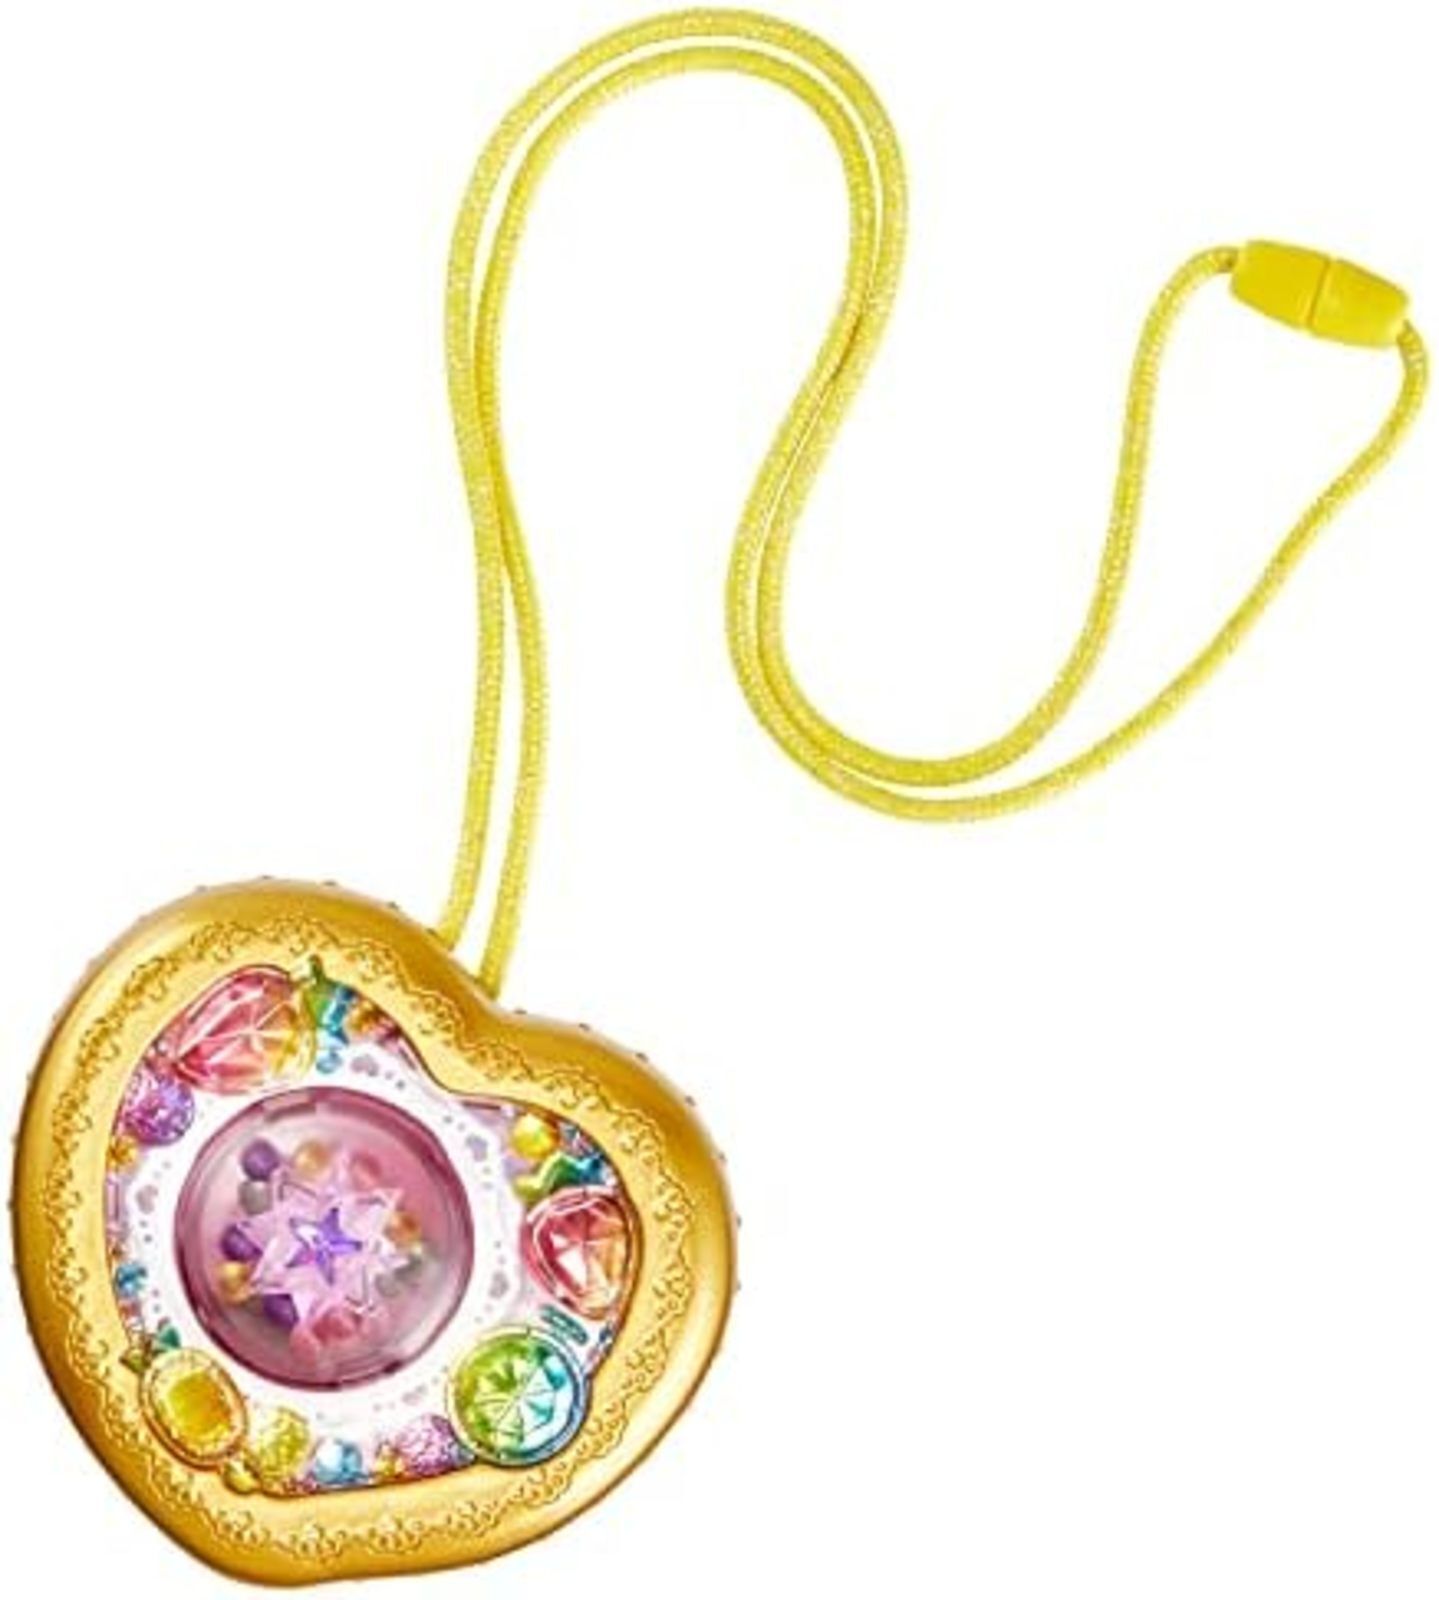 BANDAI Delicious Party PreCure Topping Transformation Heart Fruits Pendant F/S